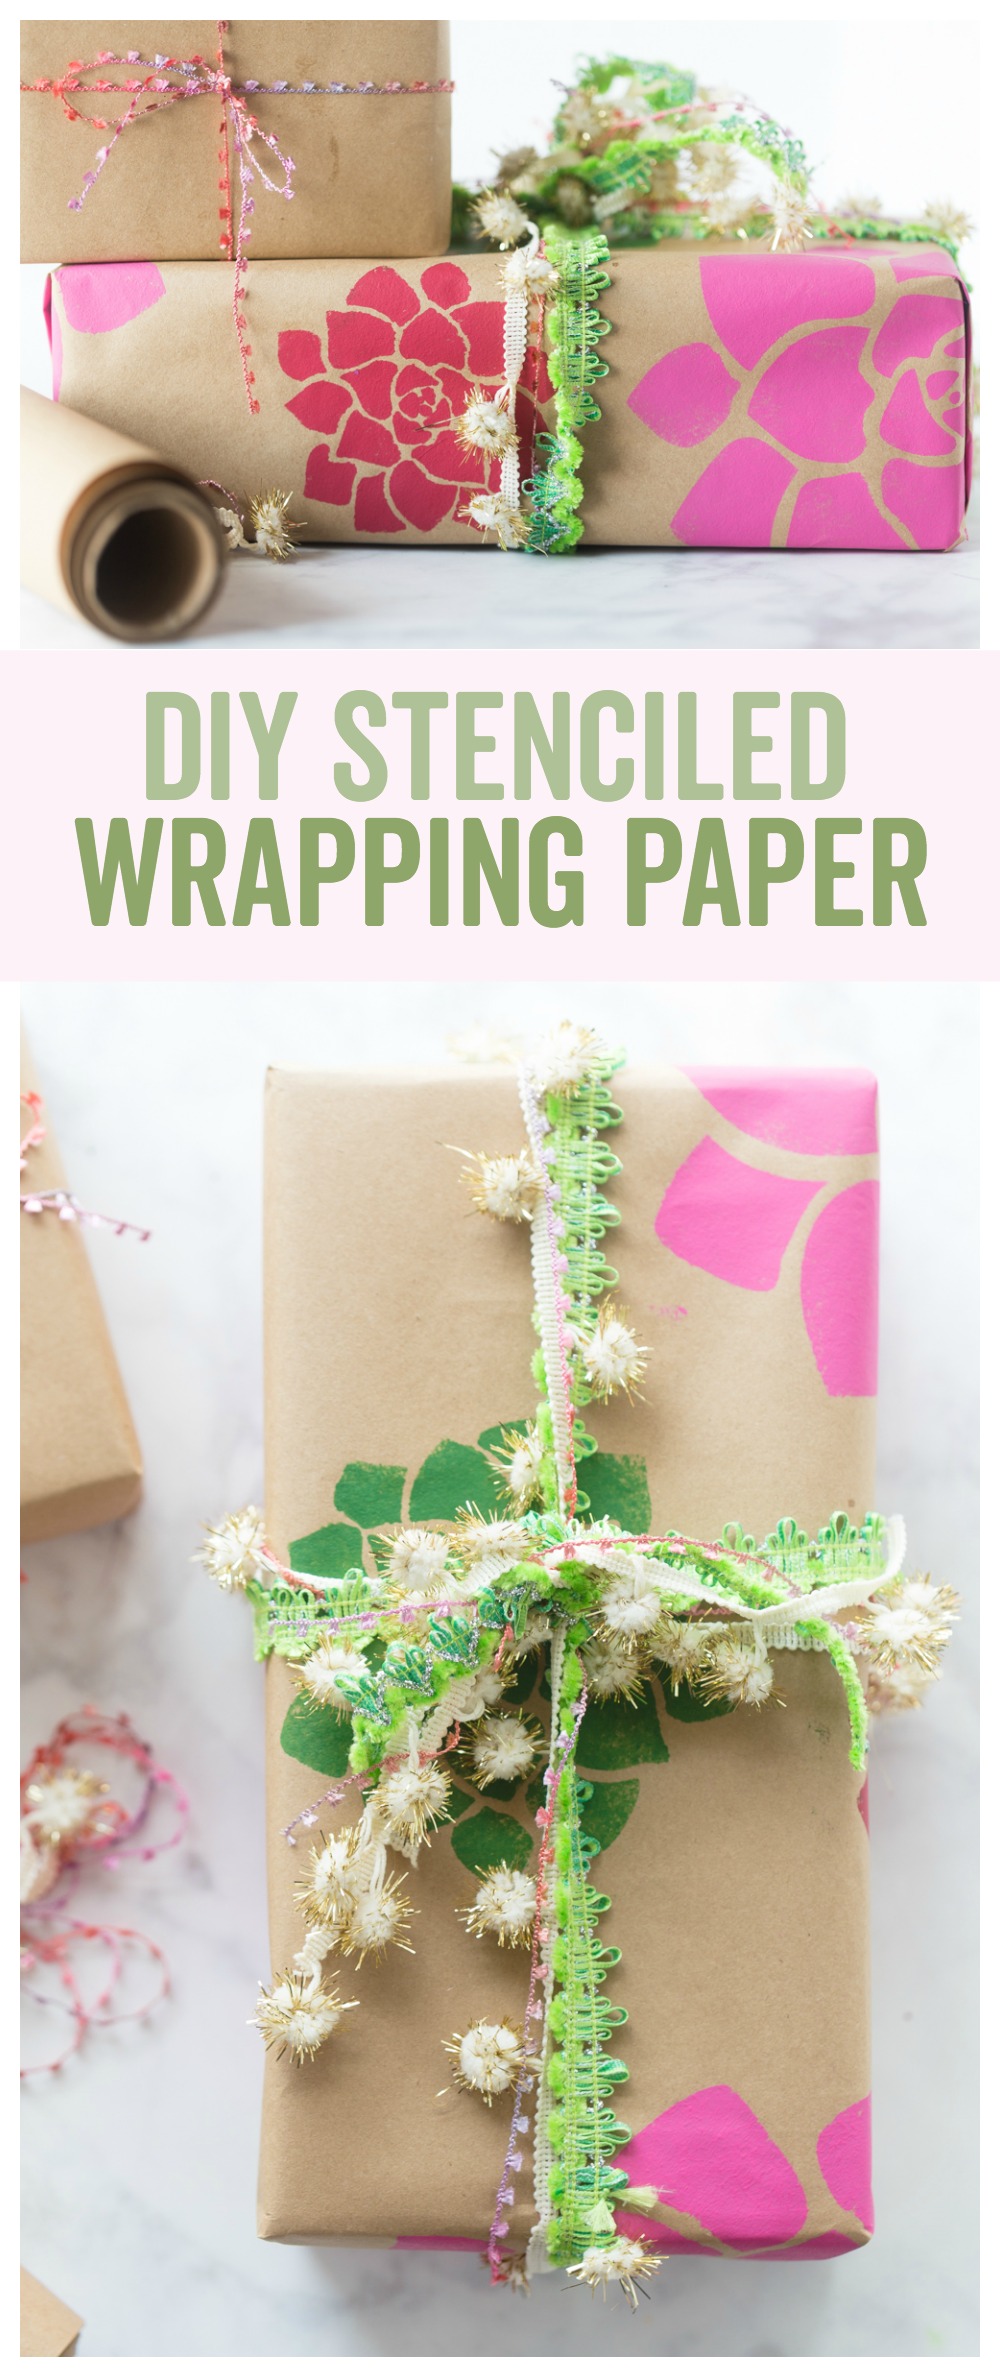 This diy wrapping paper is a fun way to add some personality to your gifts!  You can stencil just about any design on the paper and works great for all seasons and holidays! 